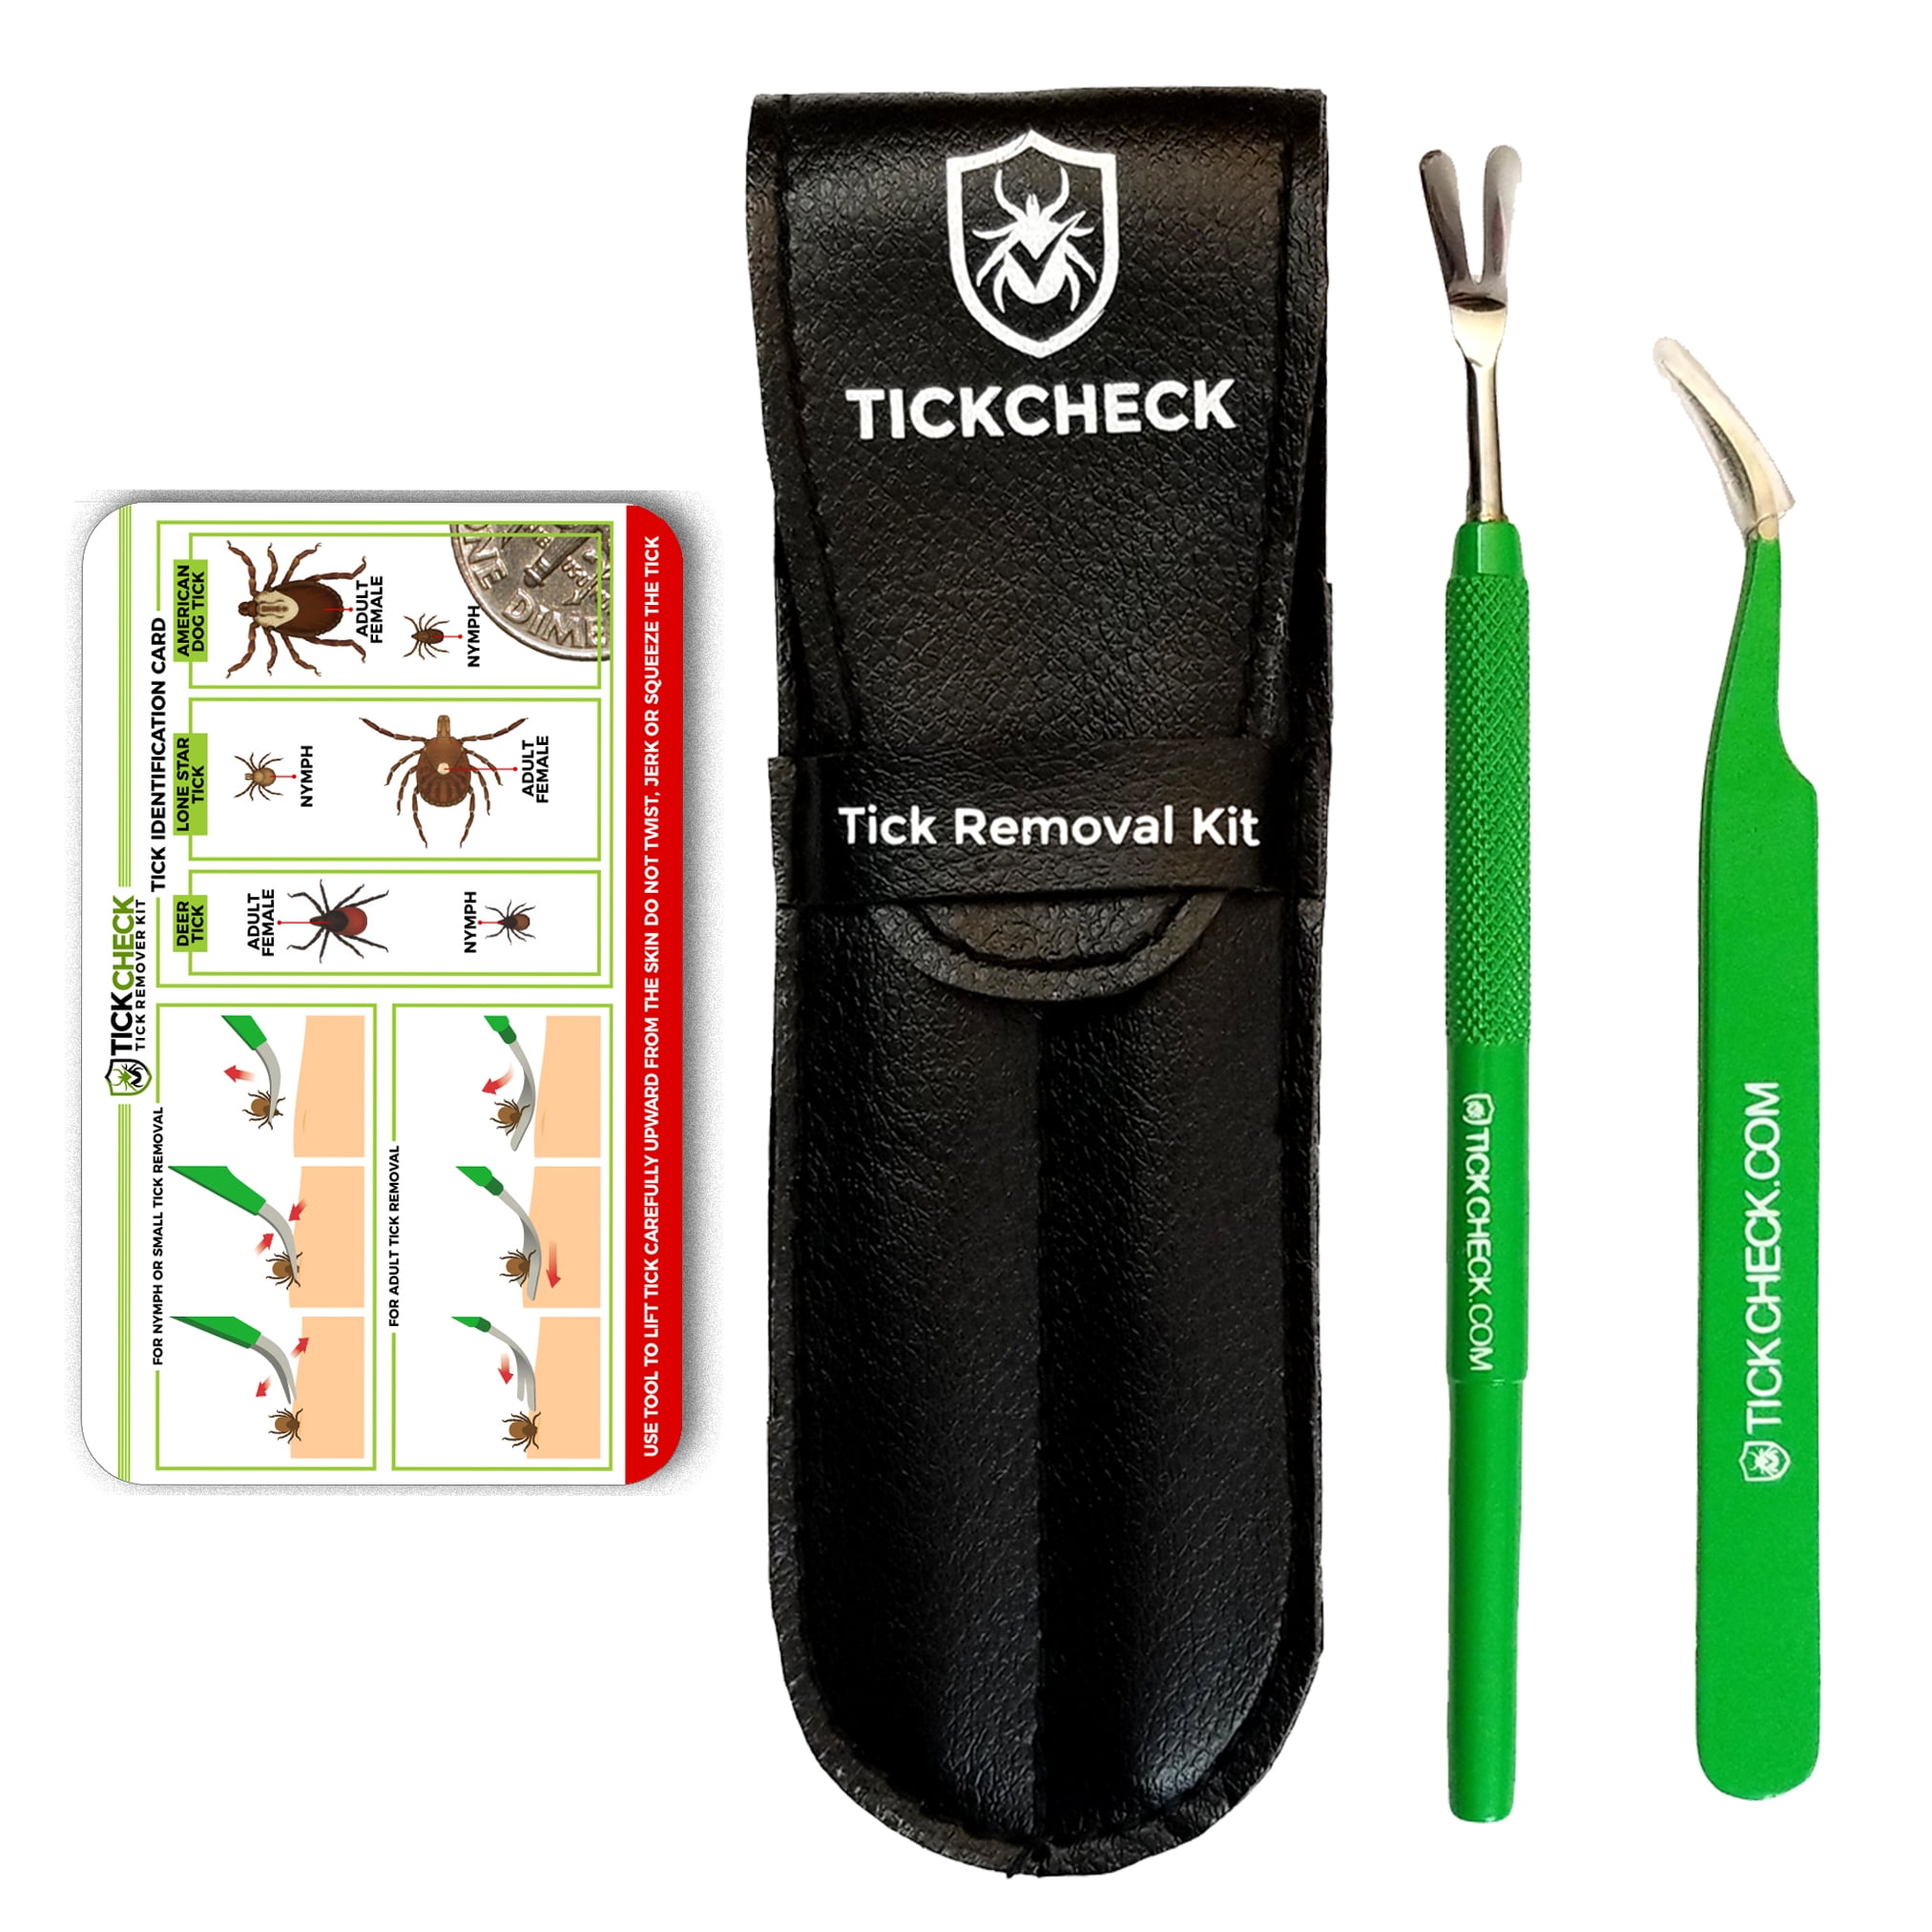 Ticked Off Original 3-Pack Tick Remover Assorted Colors For Safe & Easy Removal 